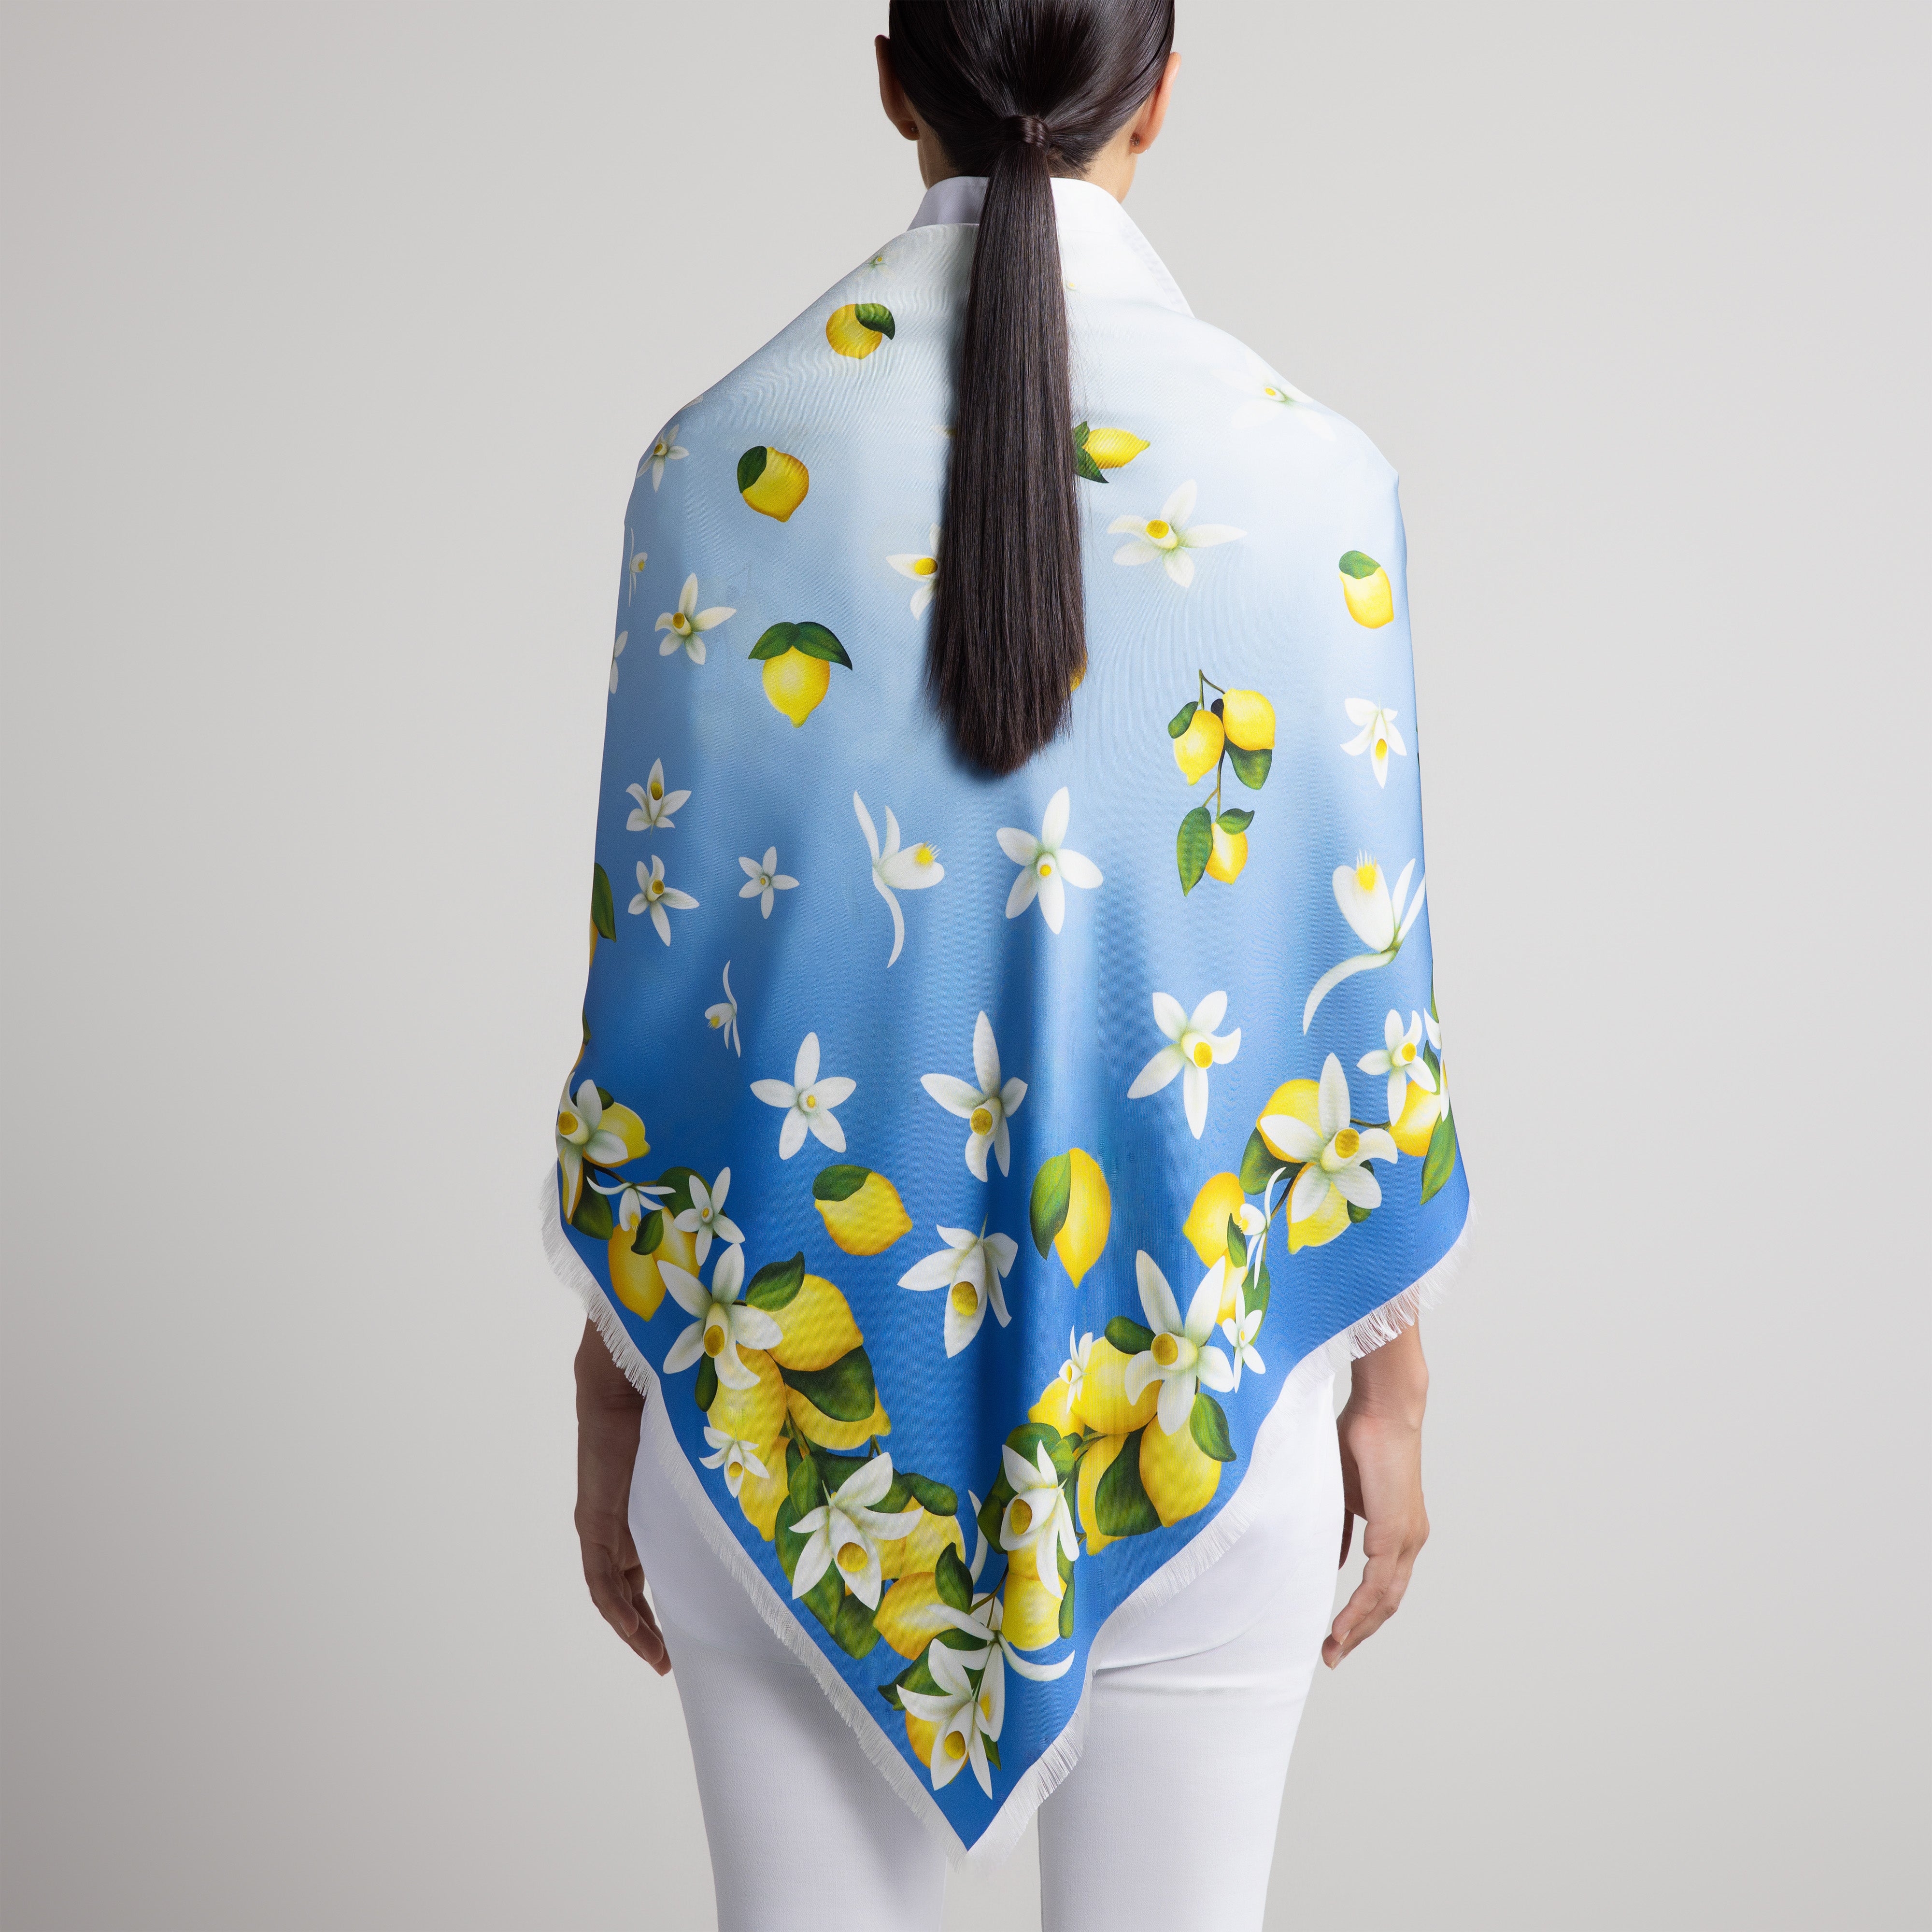 Capri Grande Silk Scarf in Sky Blue with Hand-Feathered Edges